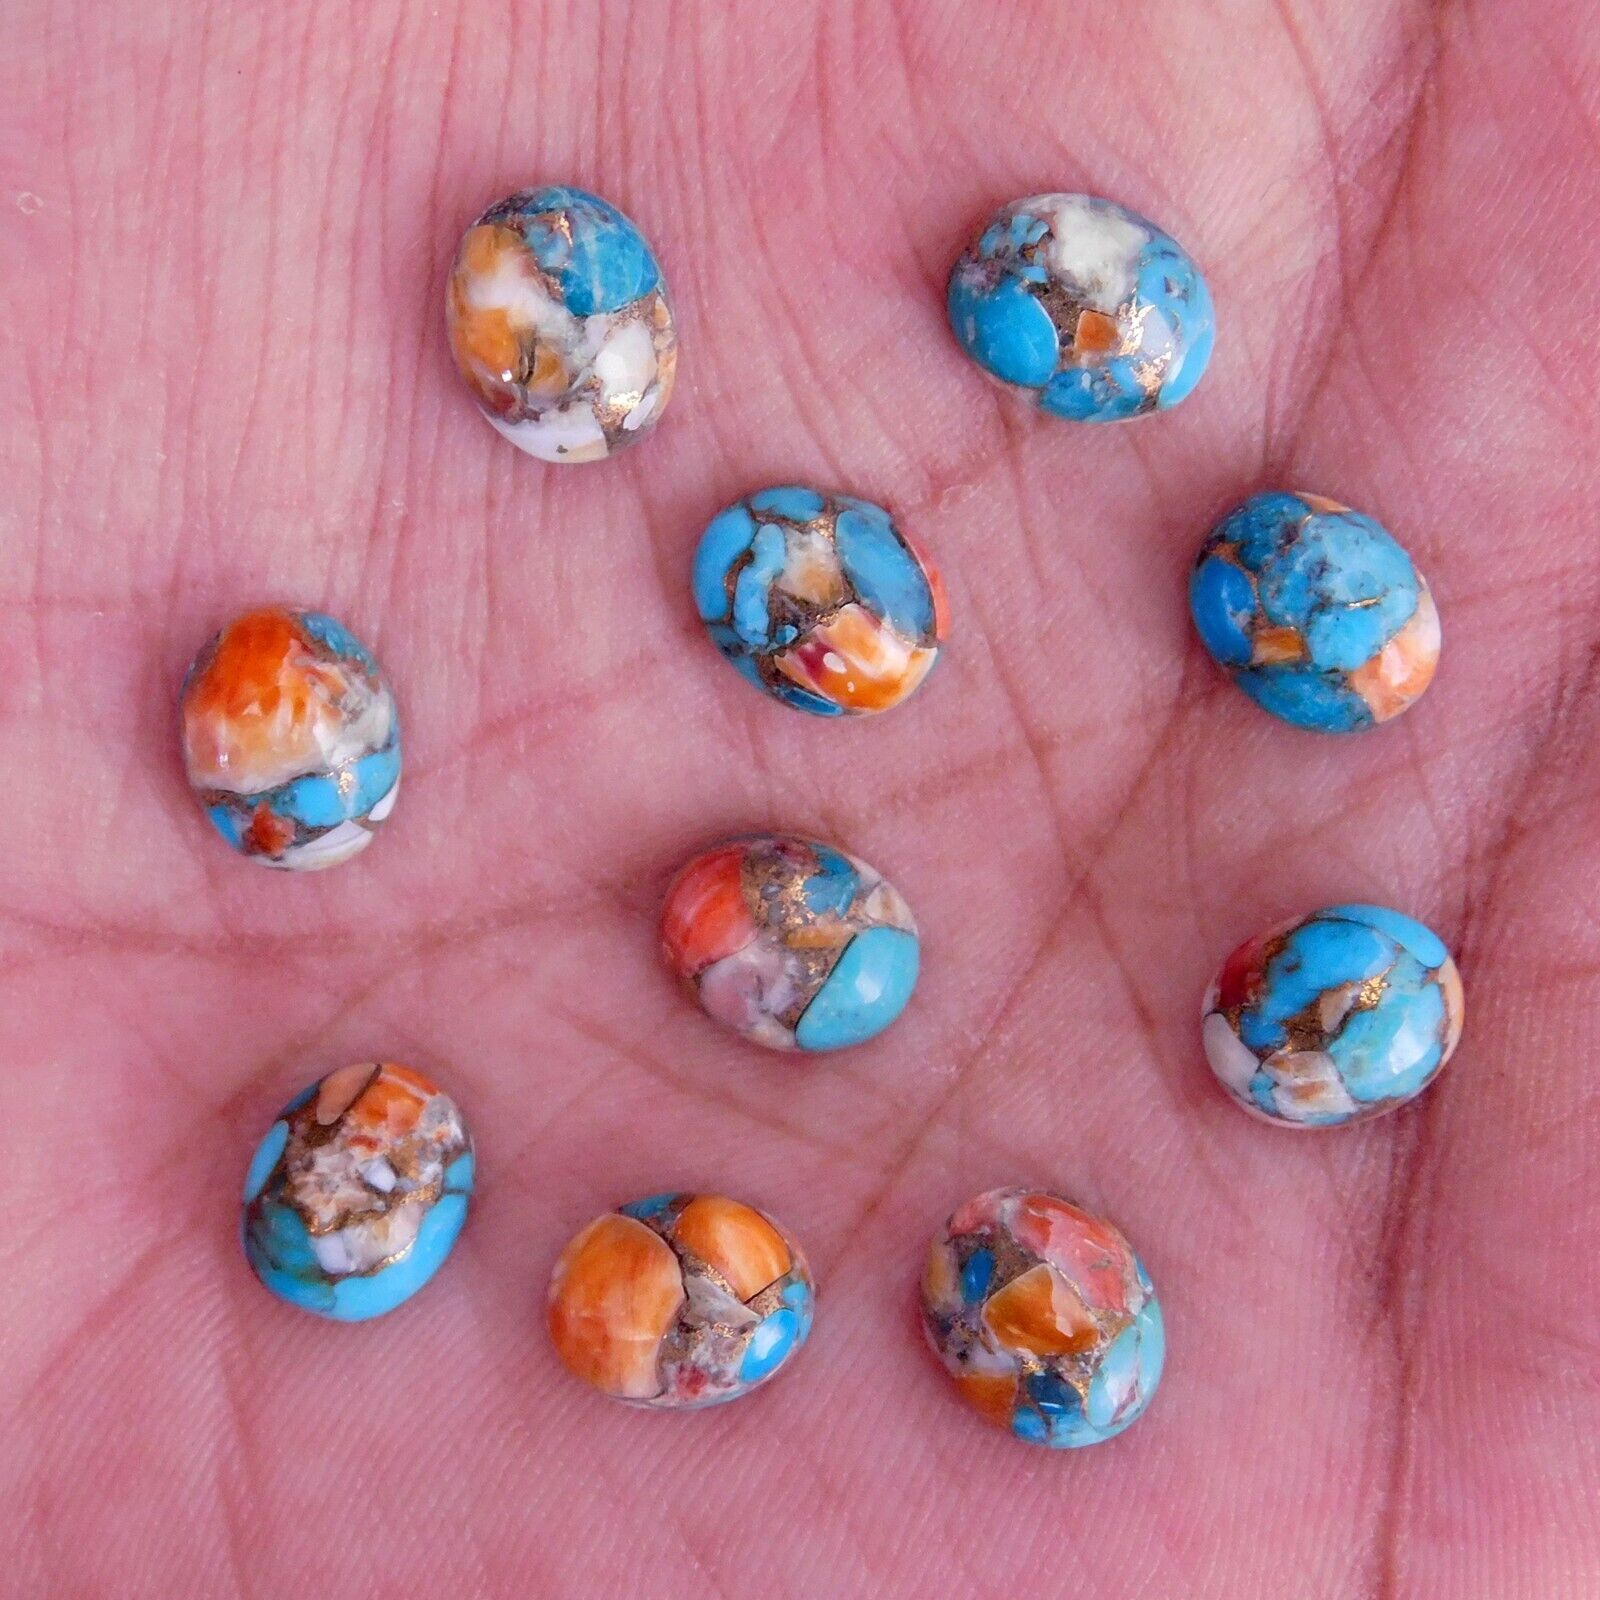 Primary image for 4x6 mm Oval Natural Composite Oyster Copper Turquoise Cabochon Gemstone 20 pcs